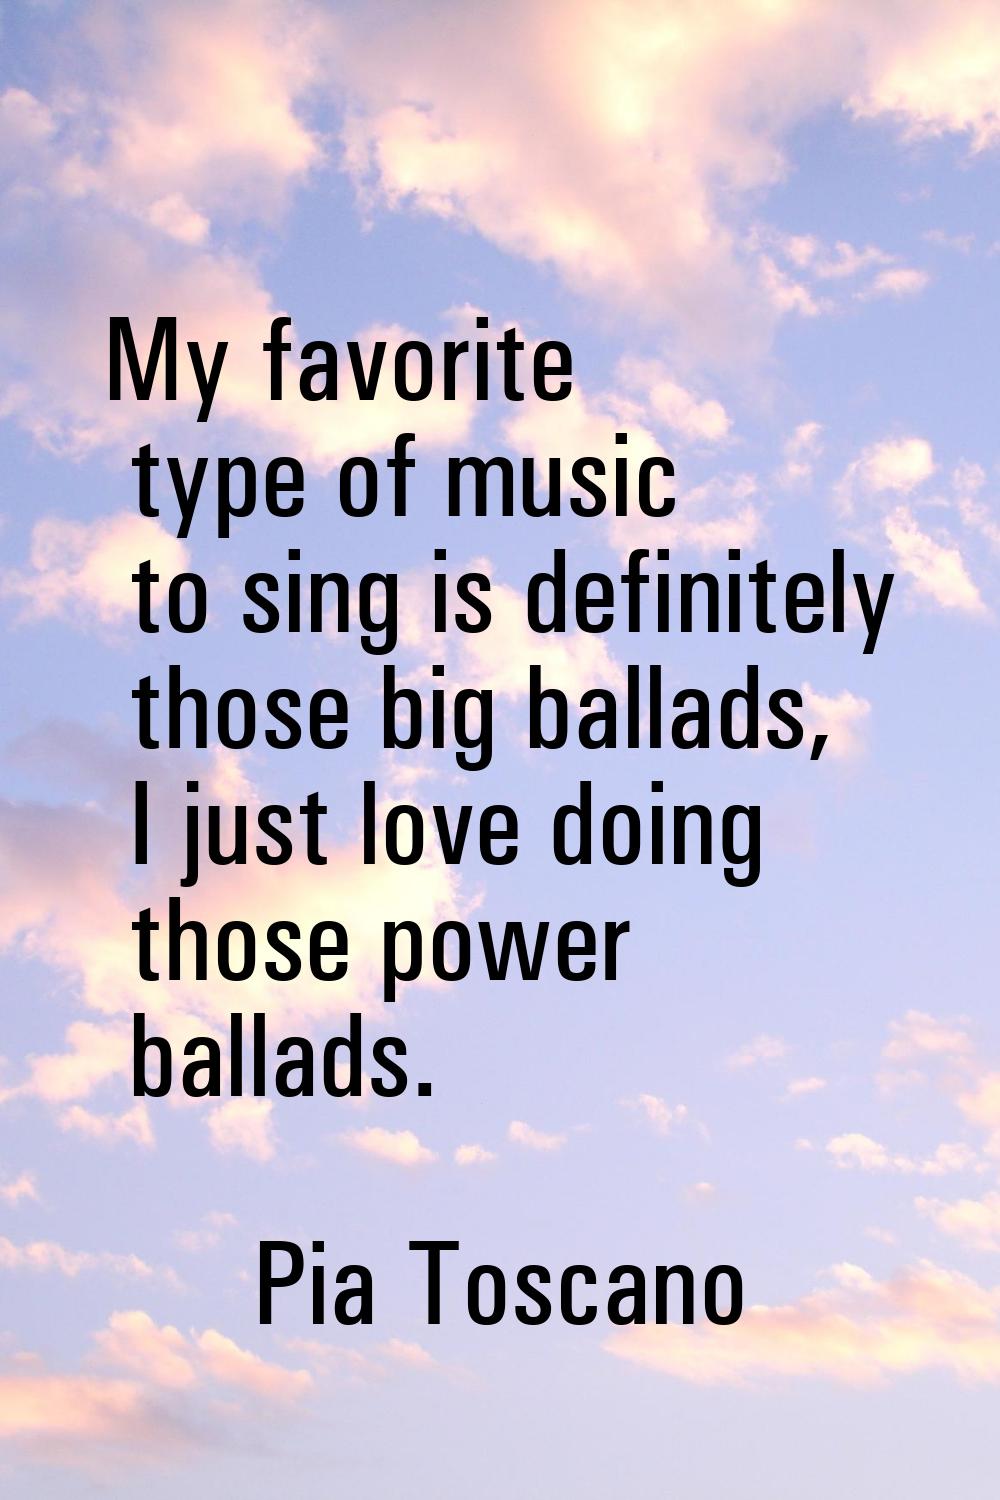 My favorite type of music to sing is definitely those big ballads, I just love doing those power ba